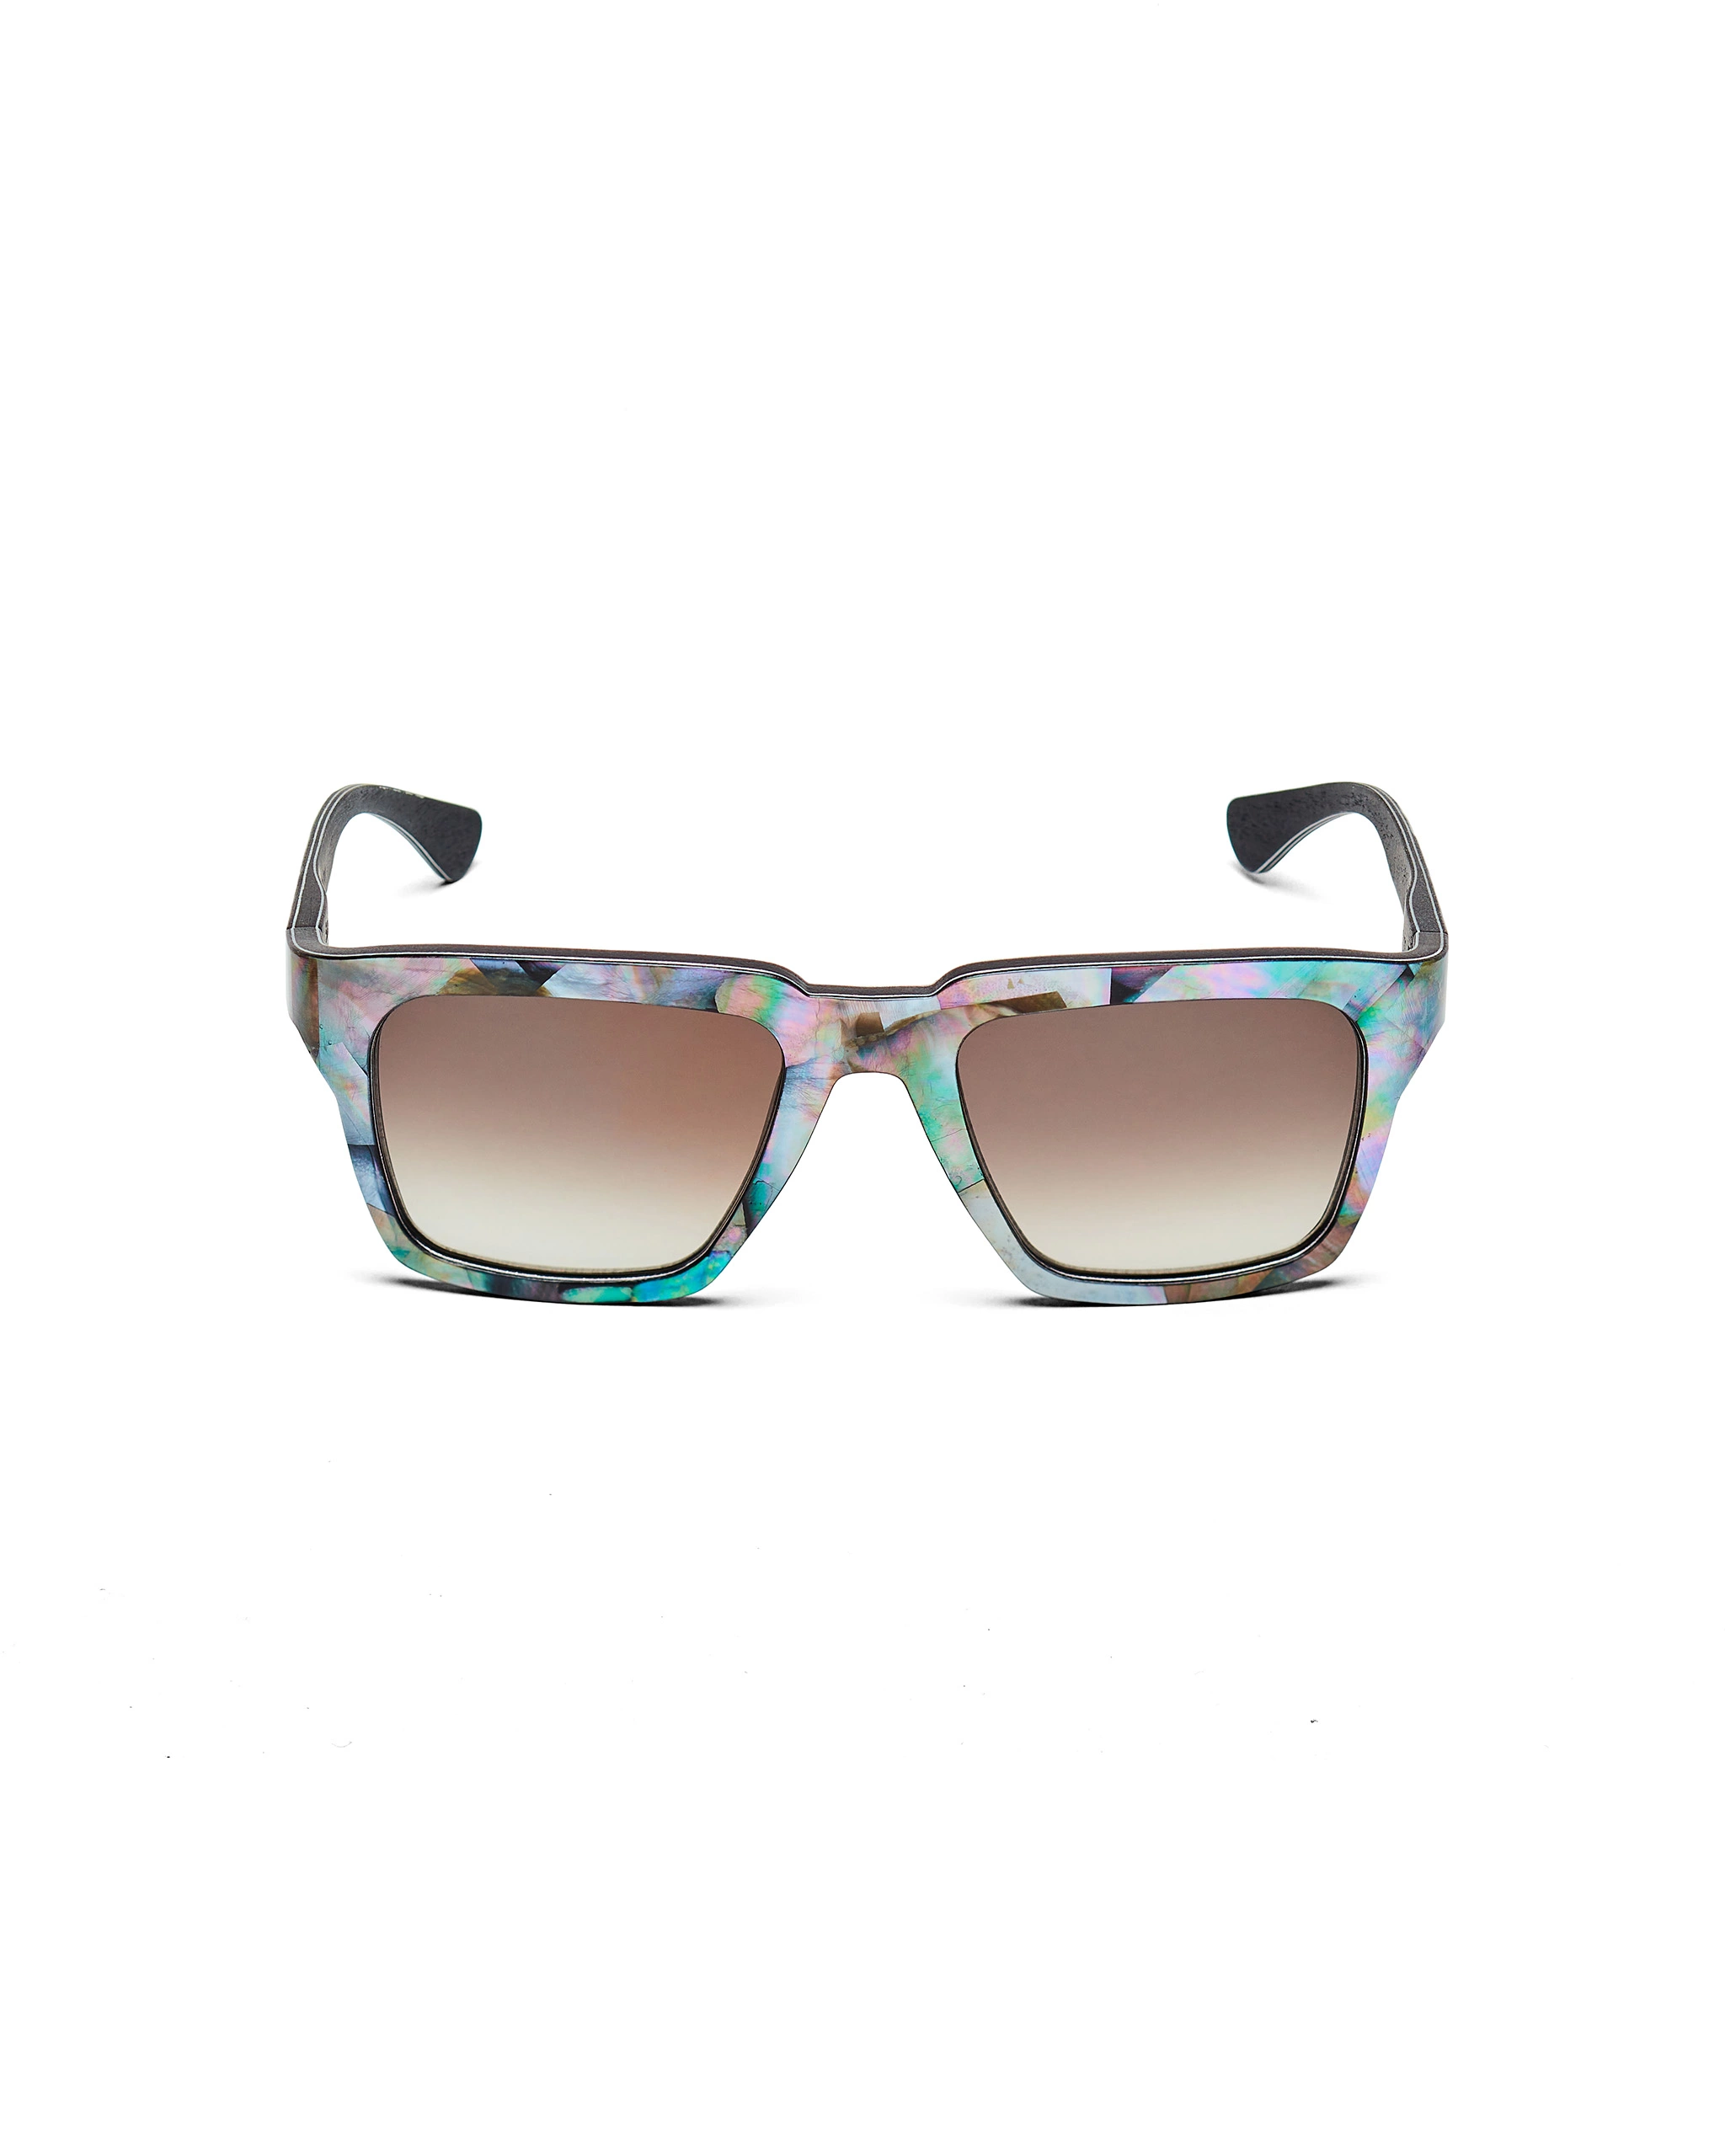 a pair of mother of pearl sunglasses with a floral pattern